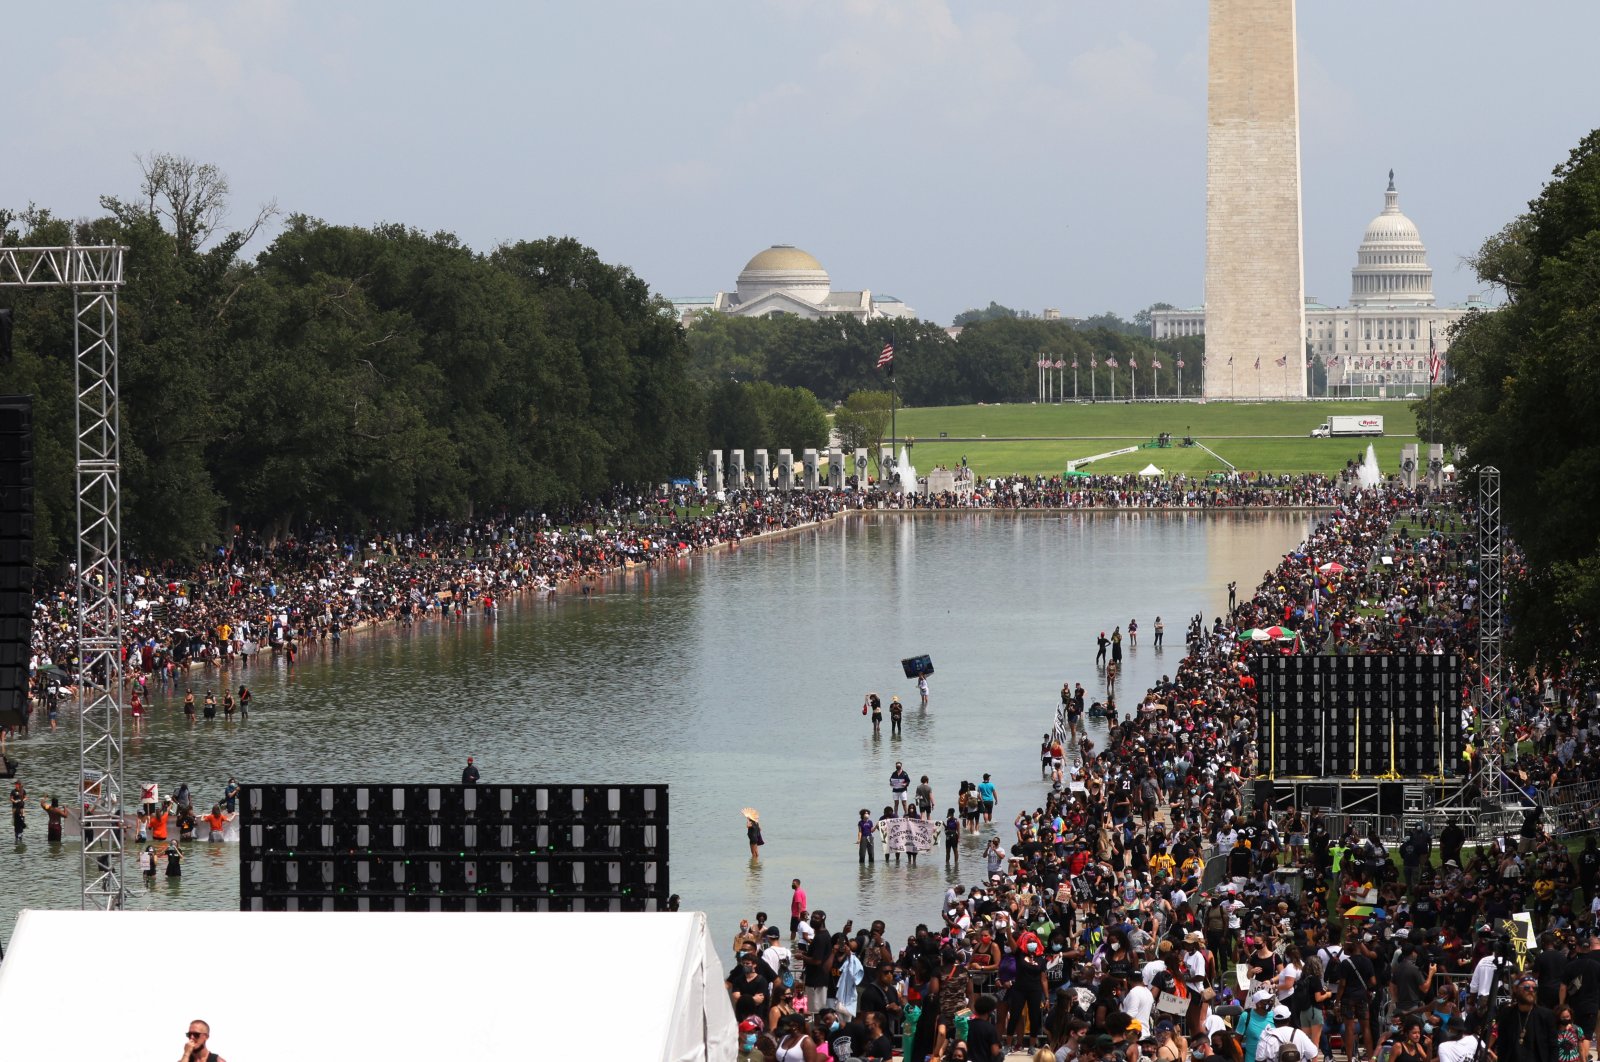 People gather around the Lincoln Memorial Reflecting Pool during the 'Get Your Knee Off Our Necks' march in support of racial justice, in Washington, U.S., Aug. 28, 2020. (Reuters Photo)